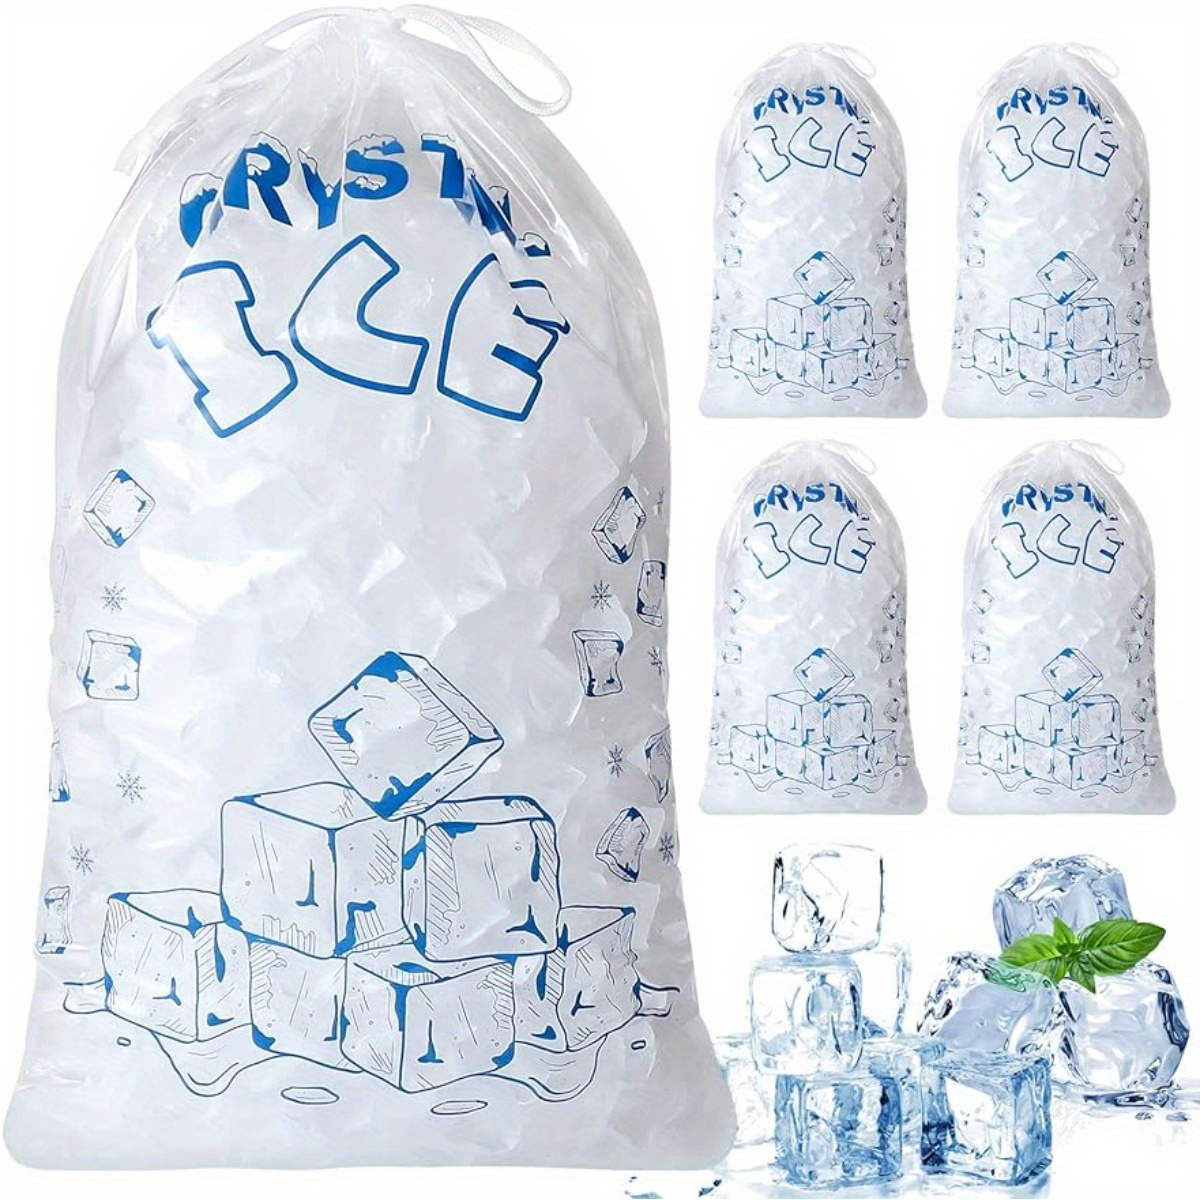 

Value Pack 50pcs Ice Bags 8 Lb With Drawstring, Ice Bags For Ice Machine, Heavy-duty Disposable Ice Cube Bags, Portable Storage And Freezer Keeper